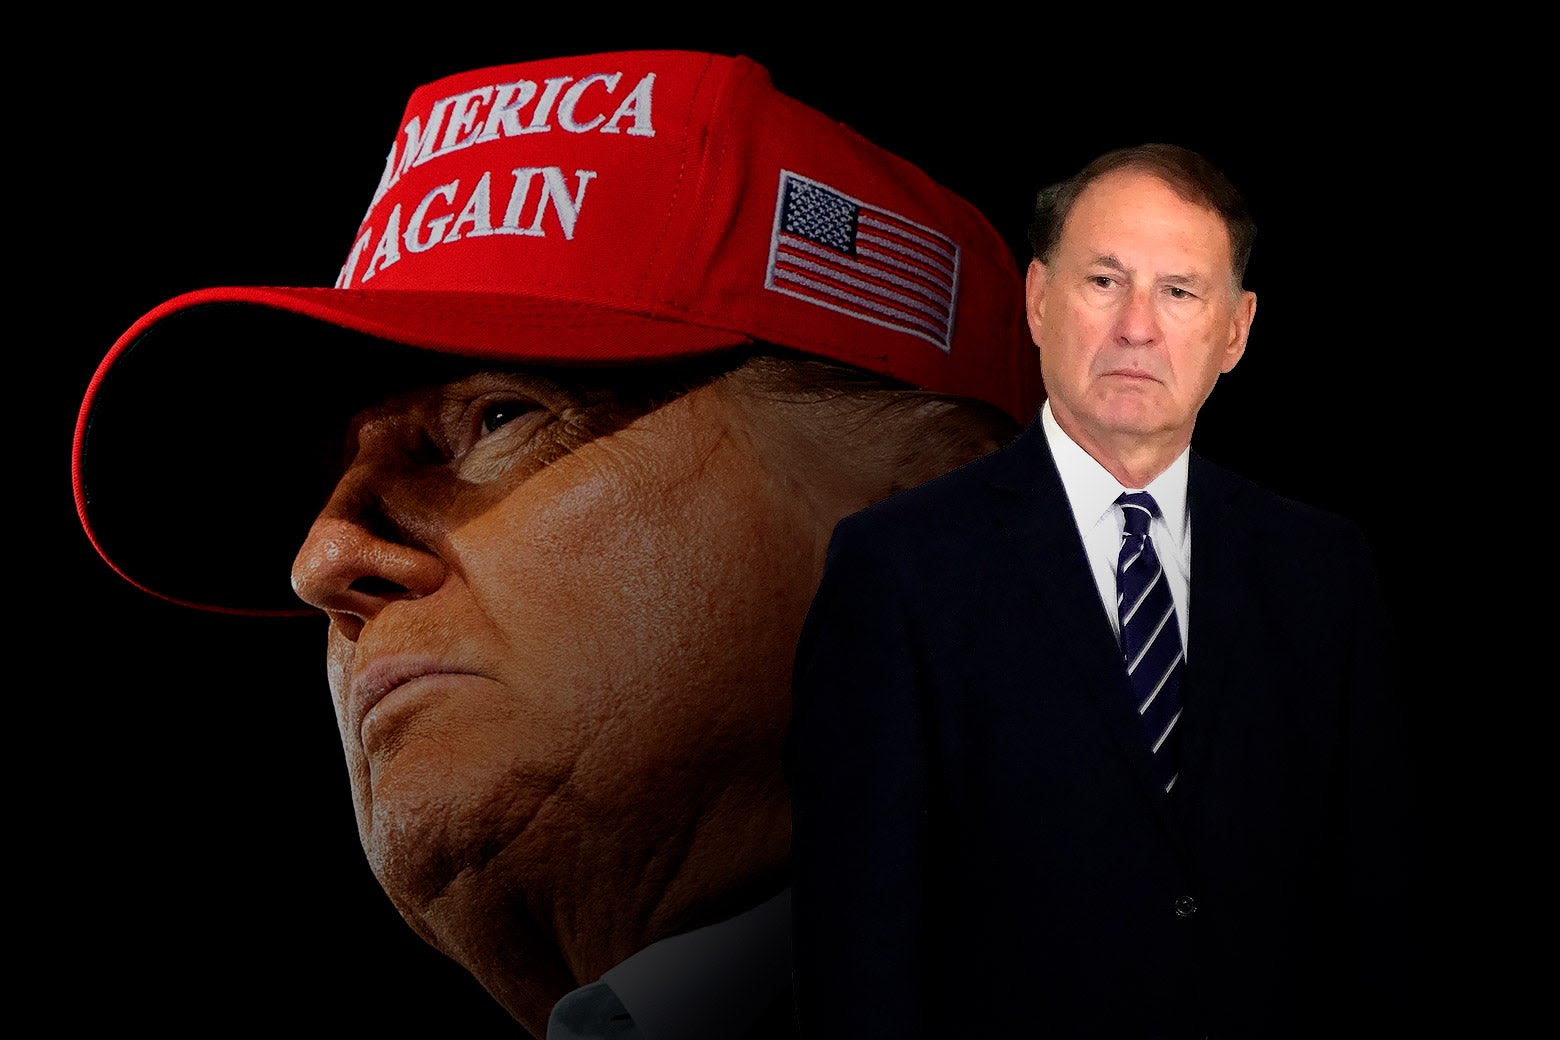 A Supreme Court Justice Gave Us Alarming New Evidence That He’s Living in MAGA World